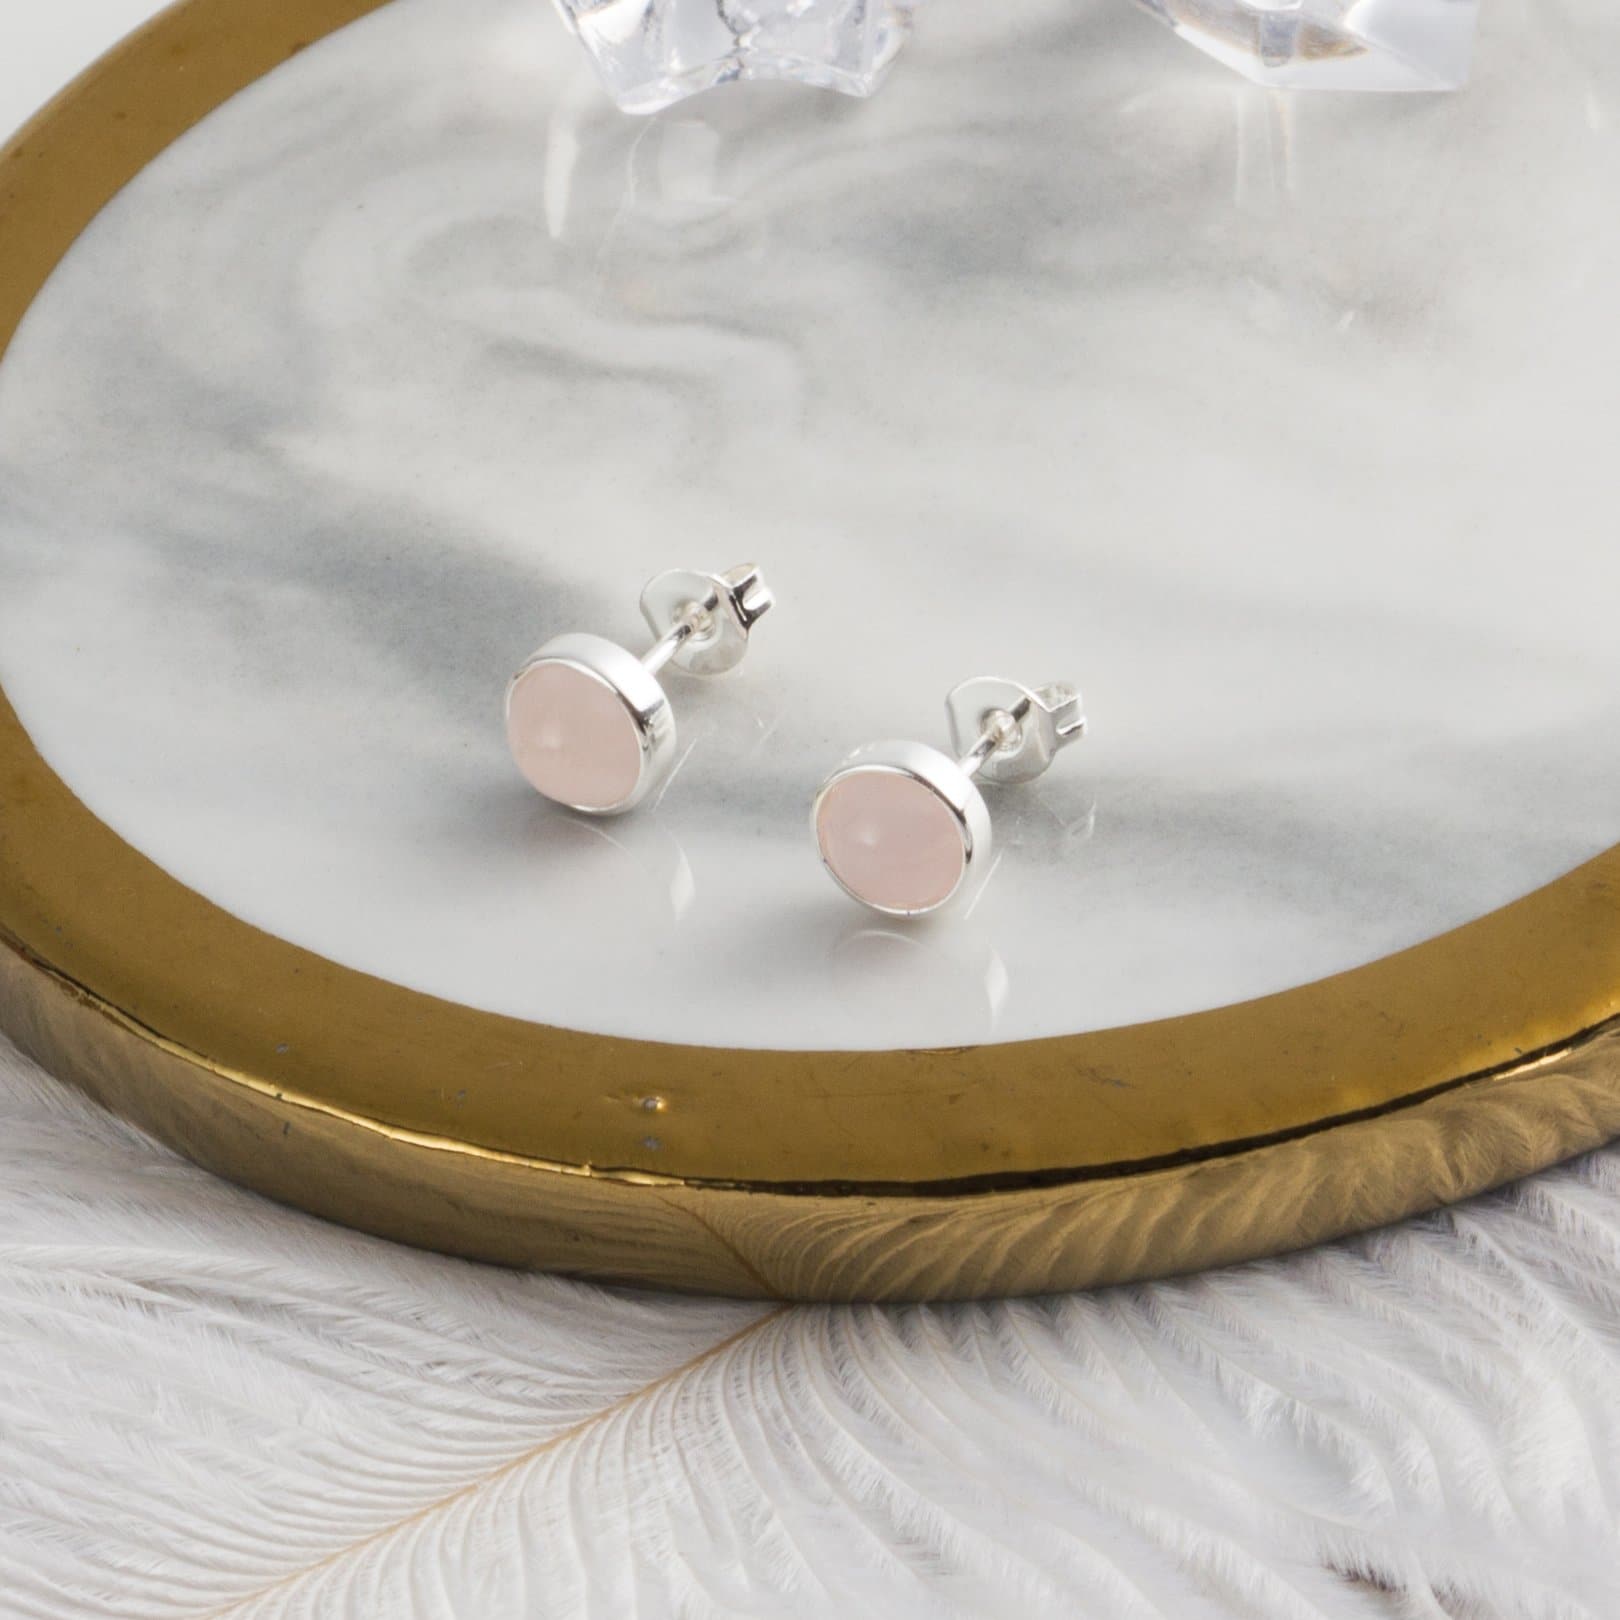 Rose Quartz Stud Earrings with Quote Card